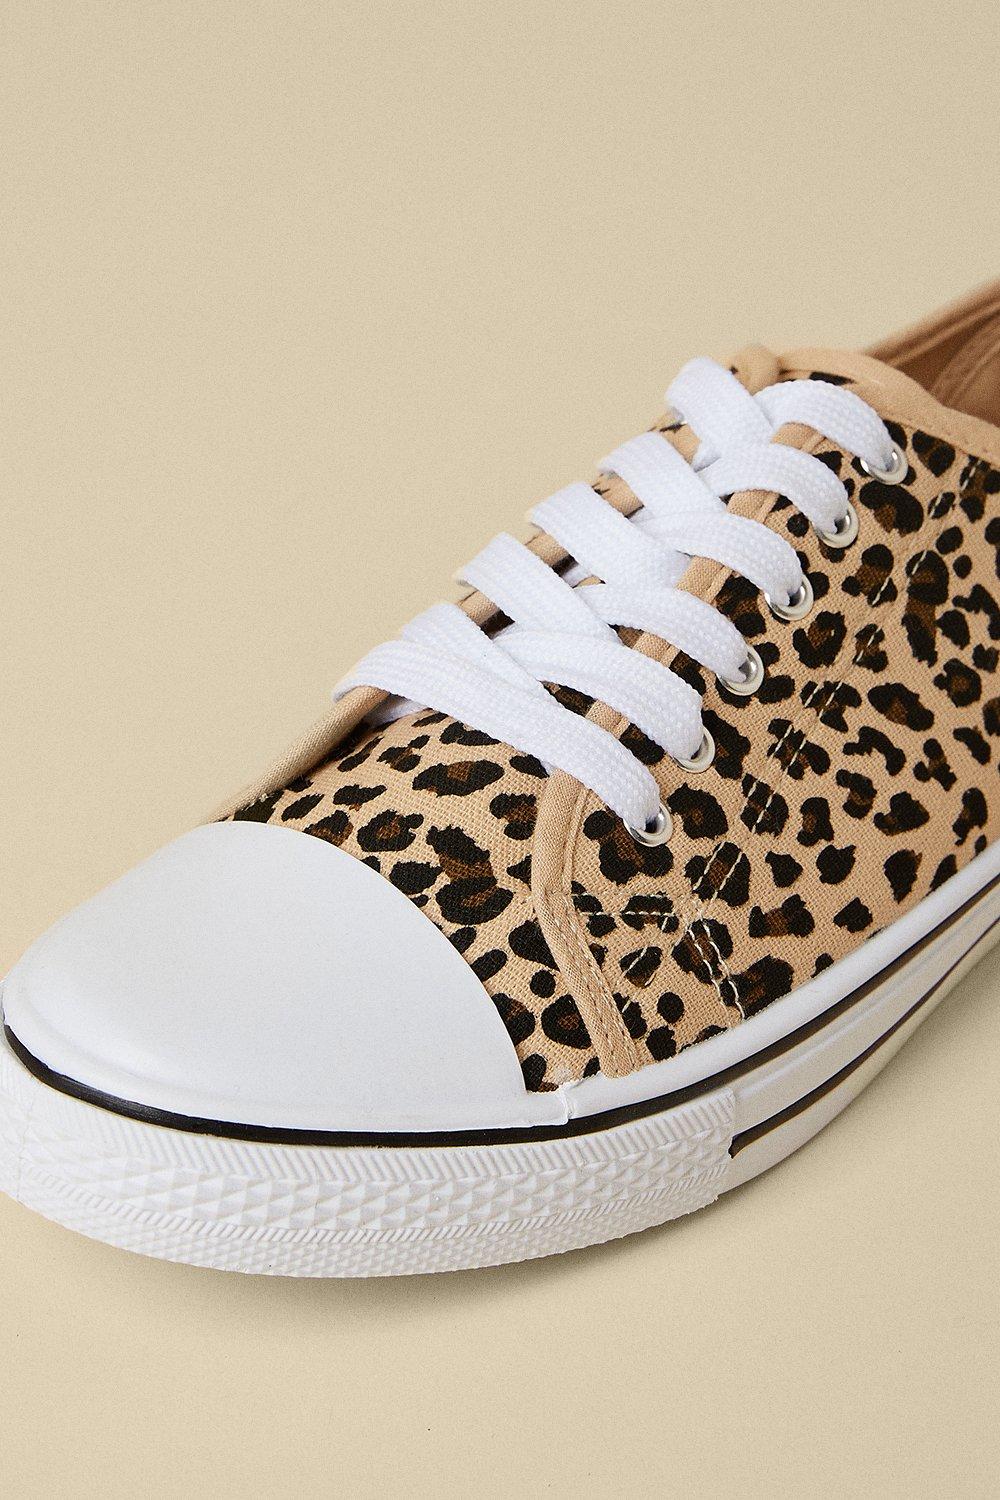 oasis leopard print trainers